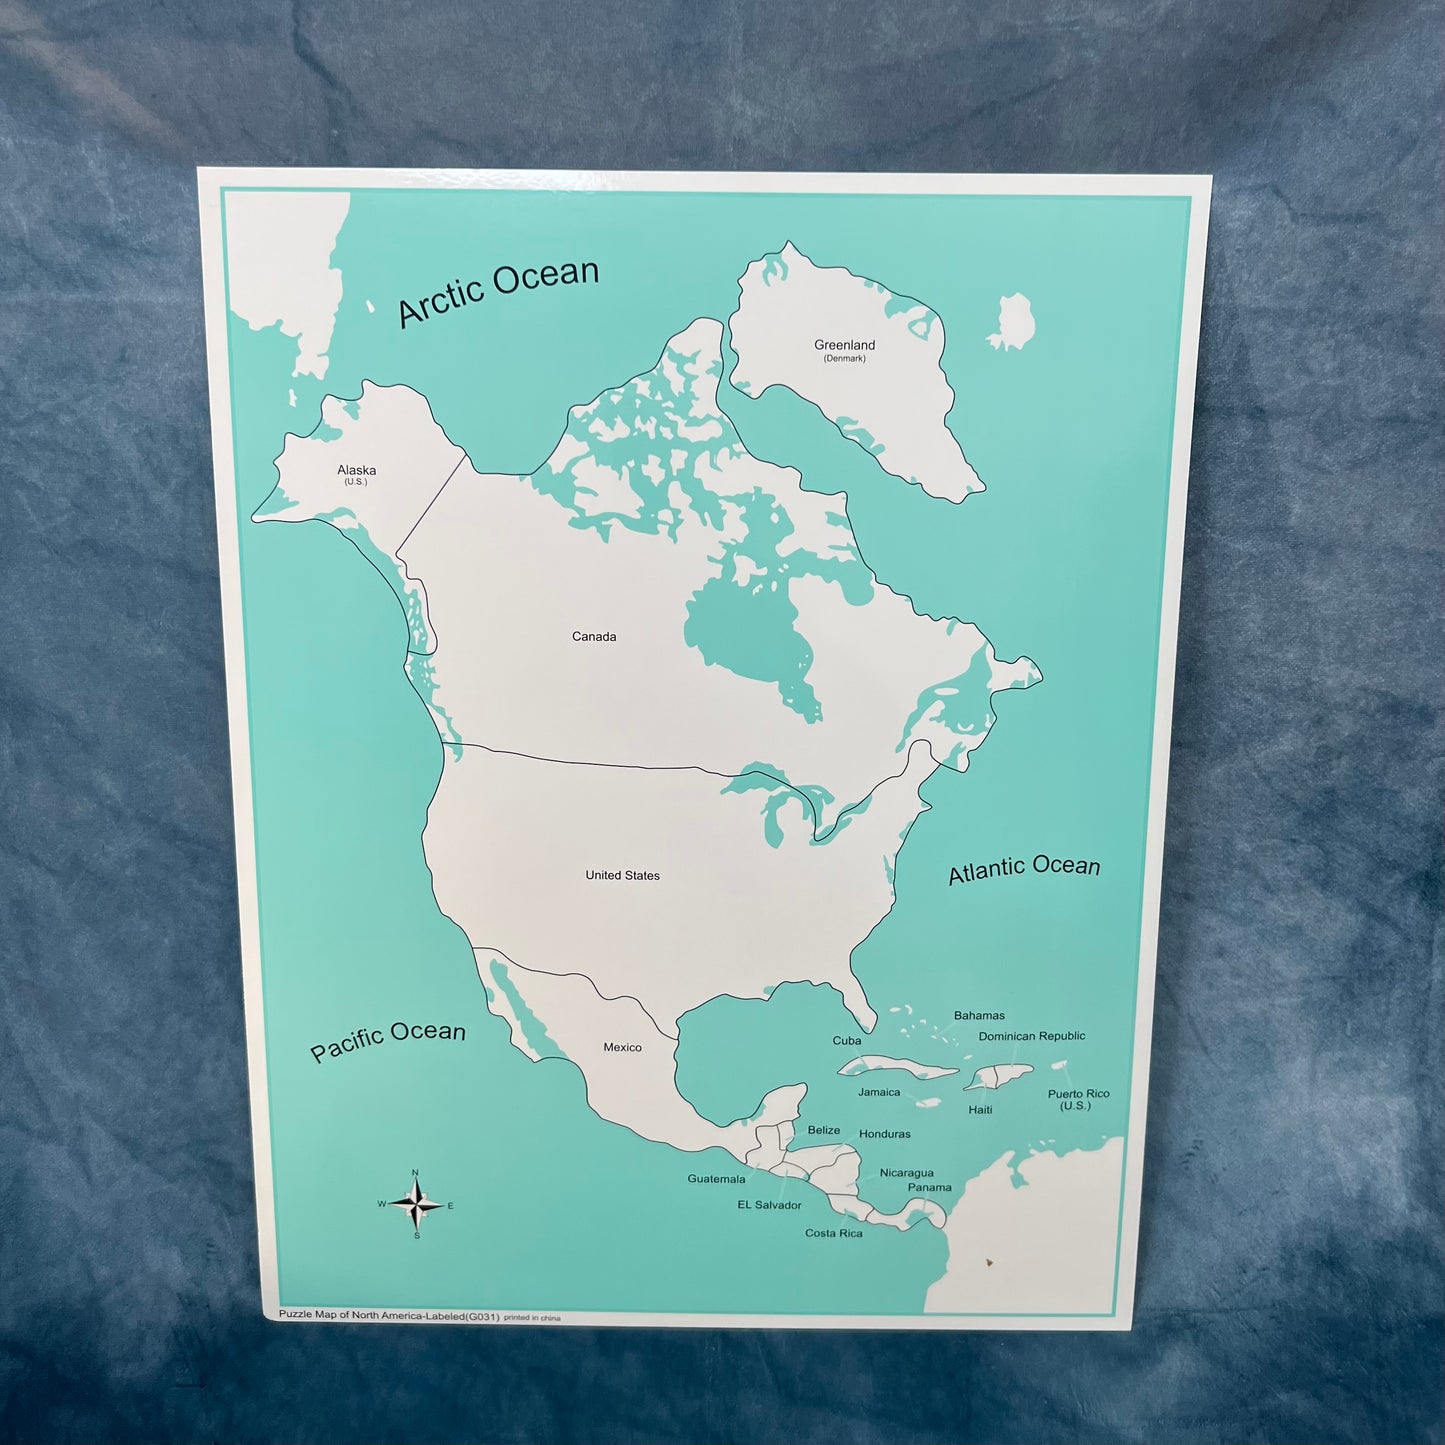 Labeled North America control map